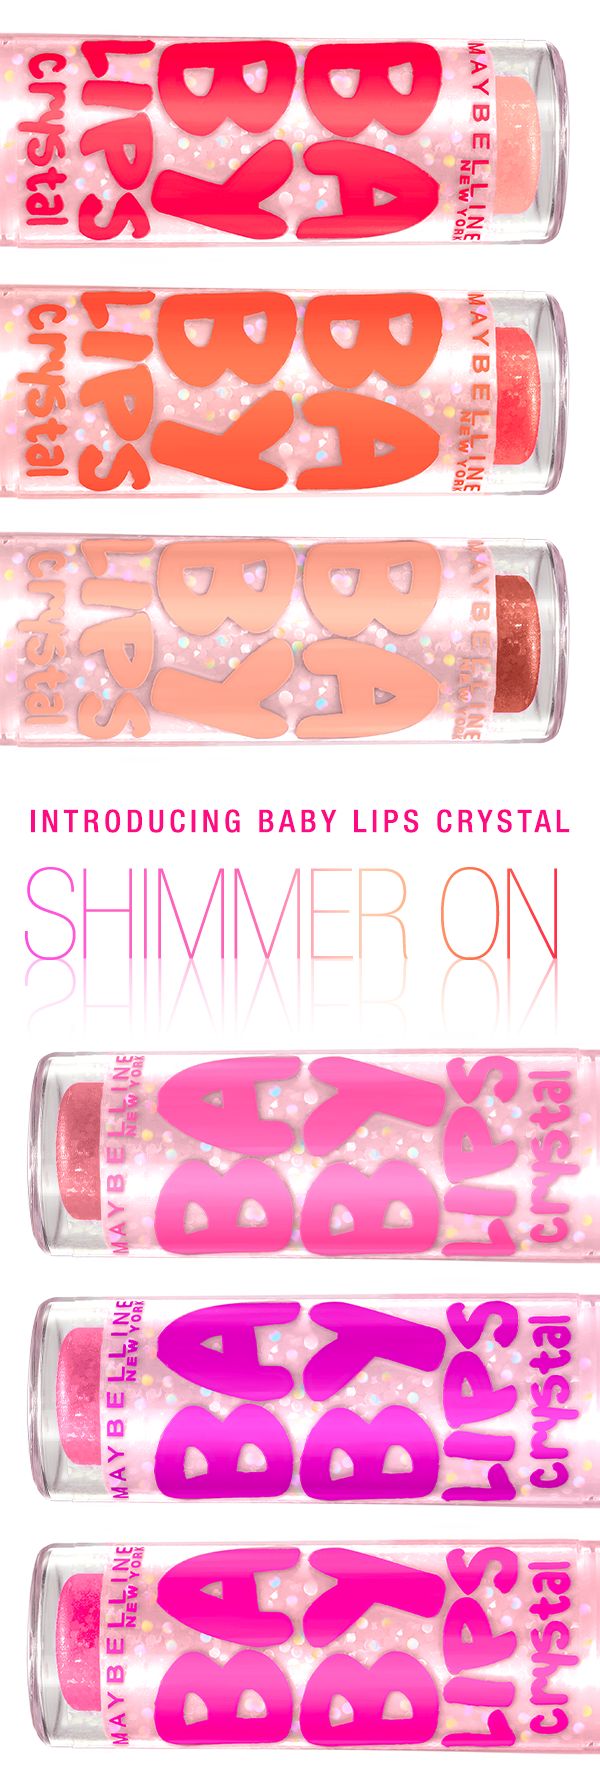 Maybelline's Baby Lips Crystal, 6 shimmery shades that give you just the rig...